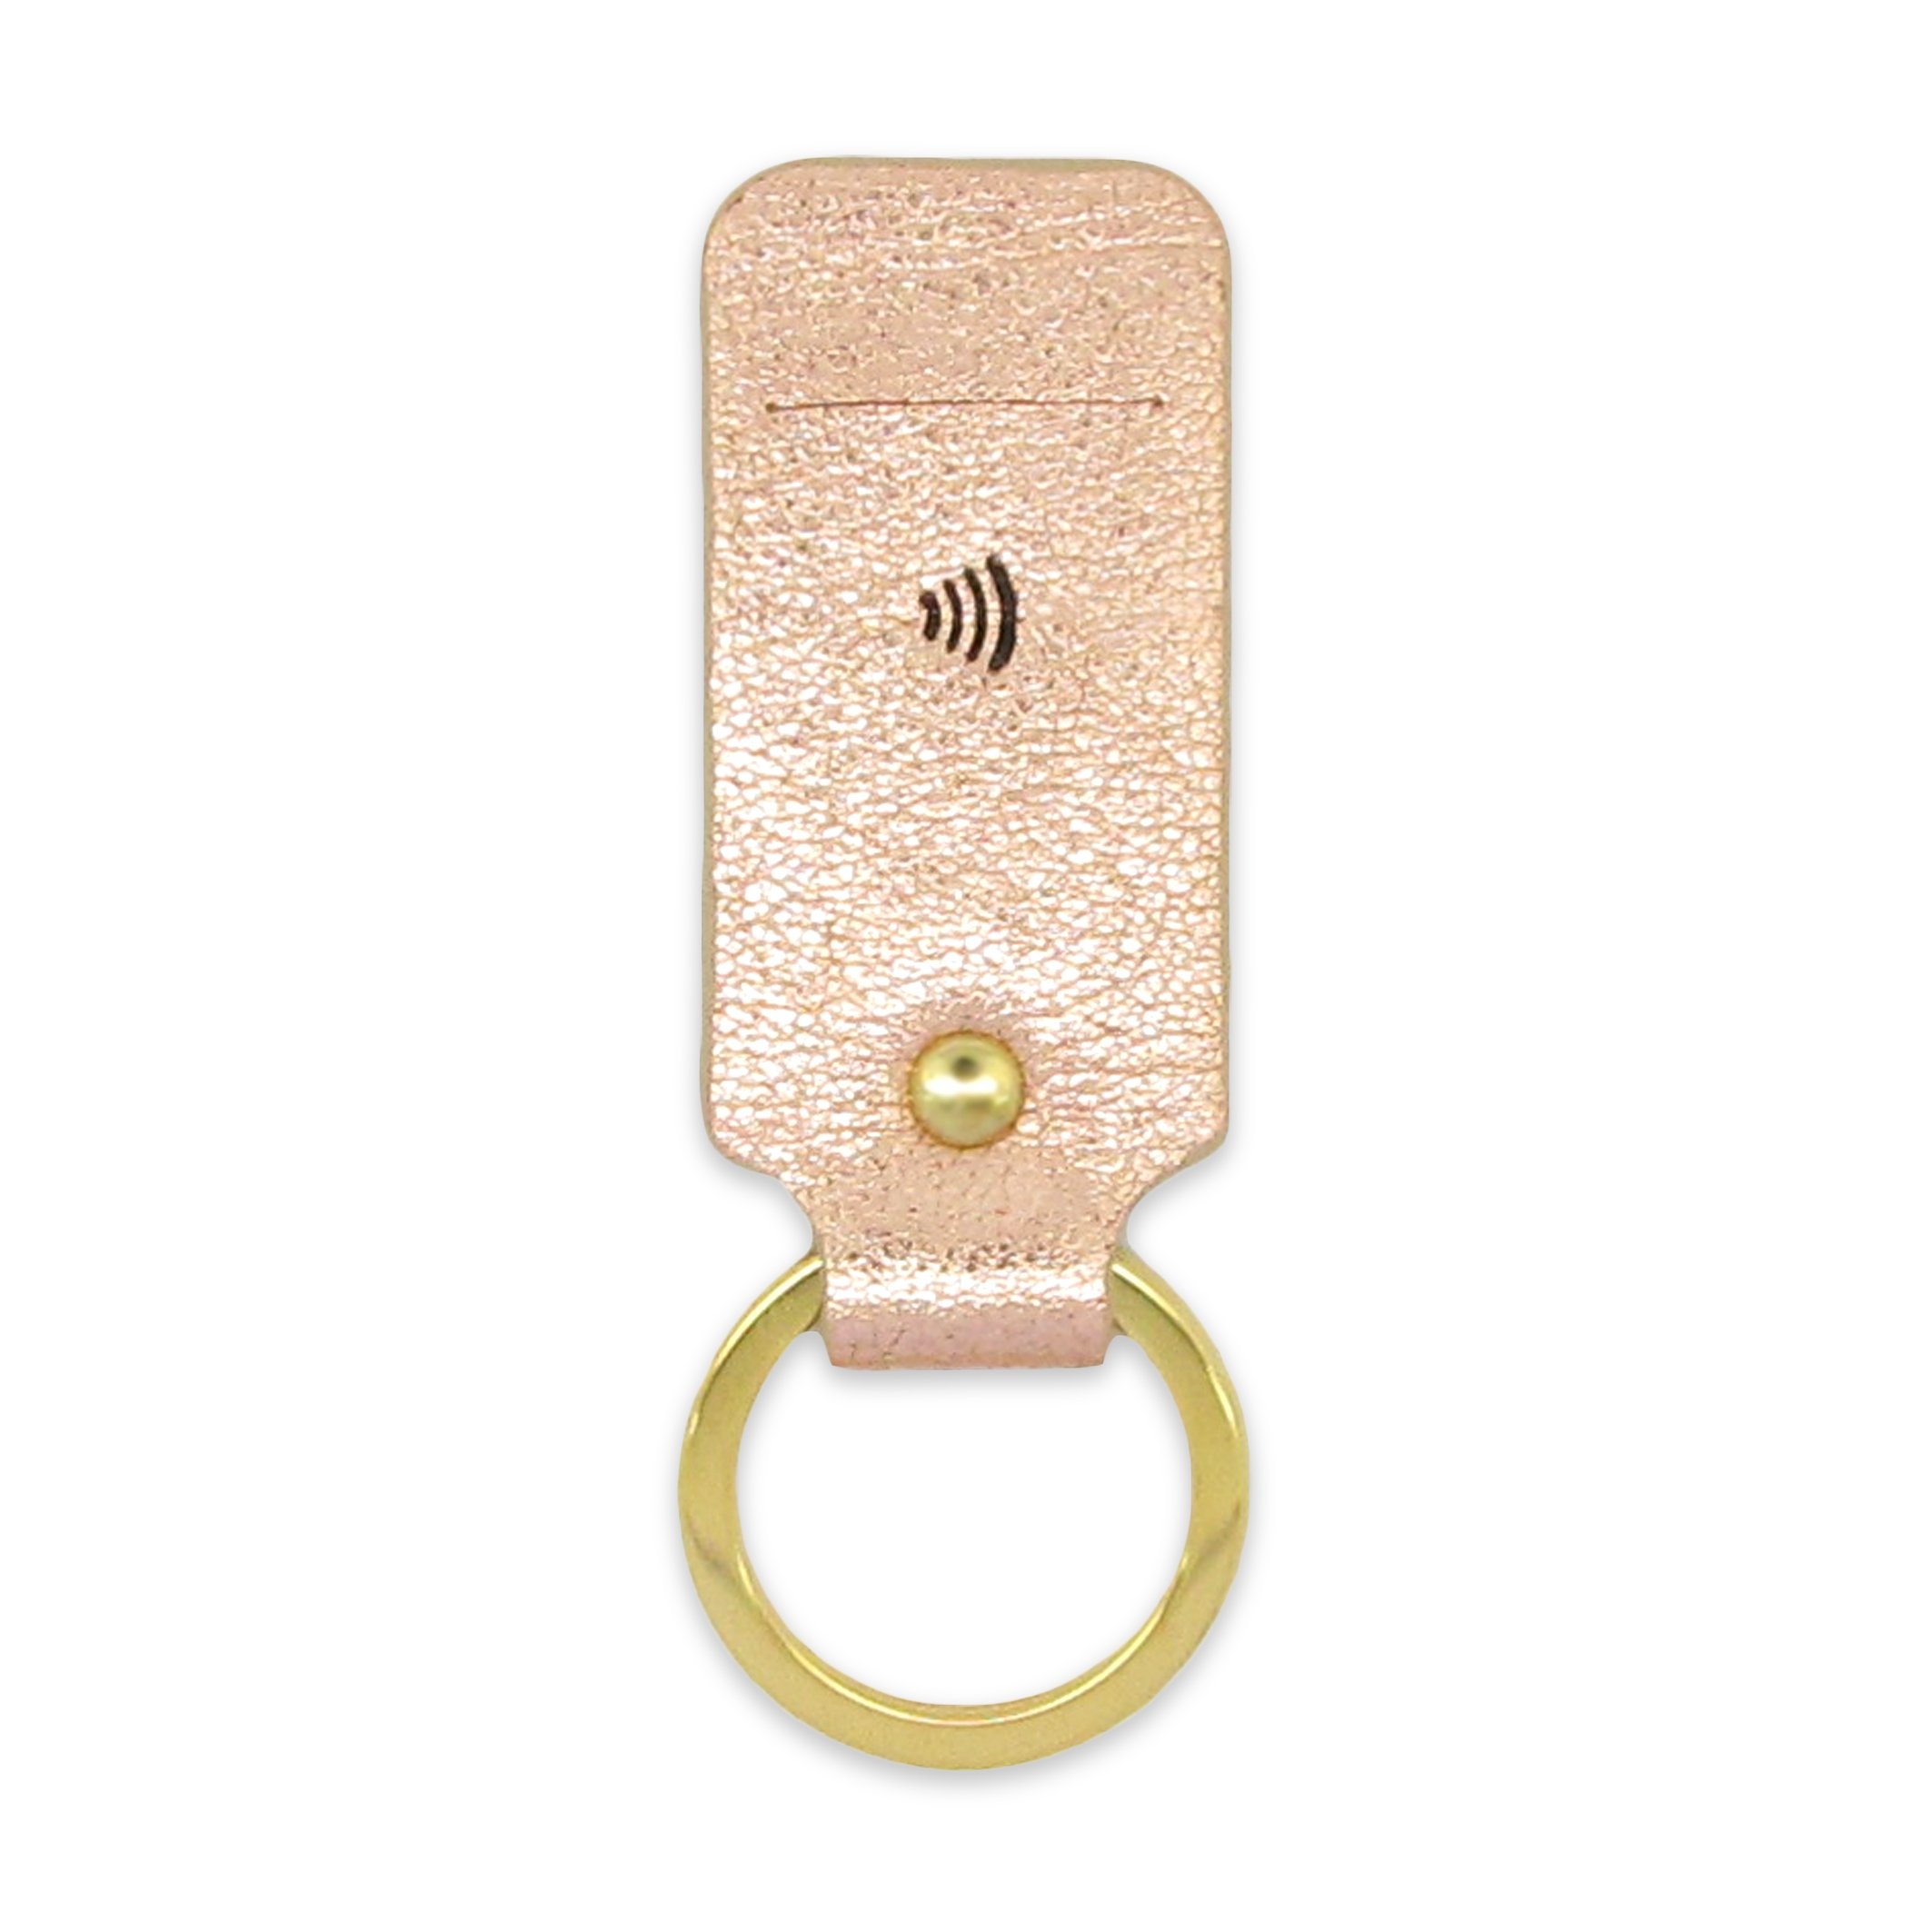 Leather Contactless Payment Key Fob – Rose Gold – With Contactless Payment Chip / Rose Gold